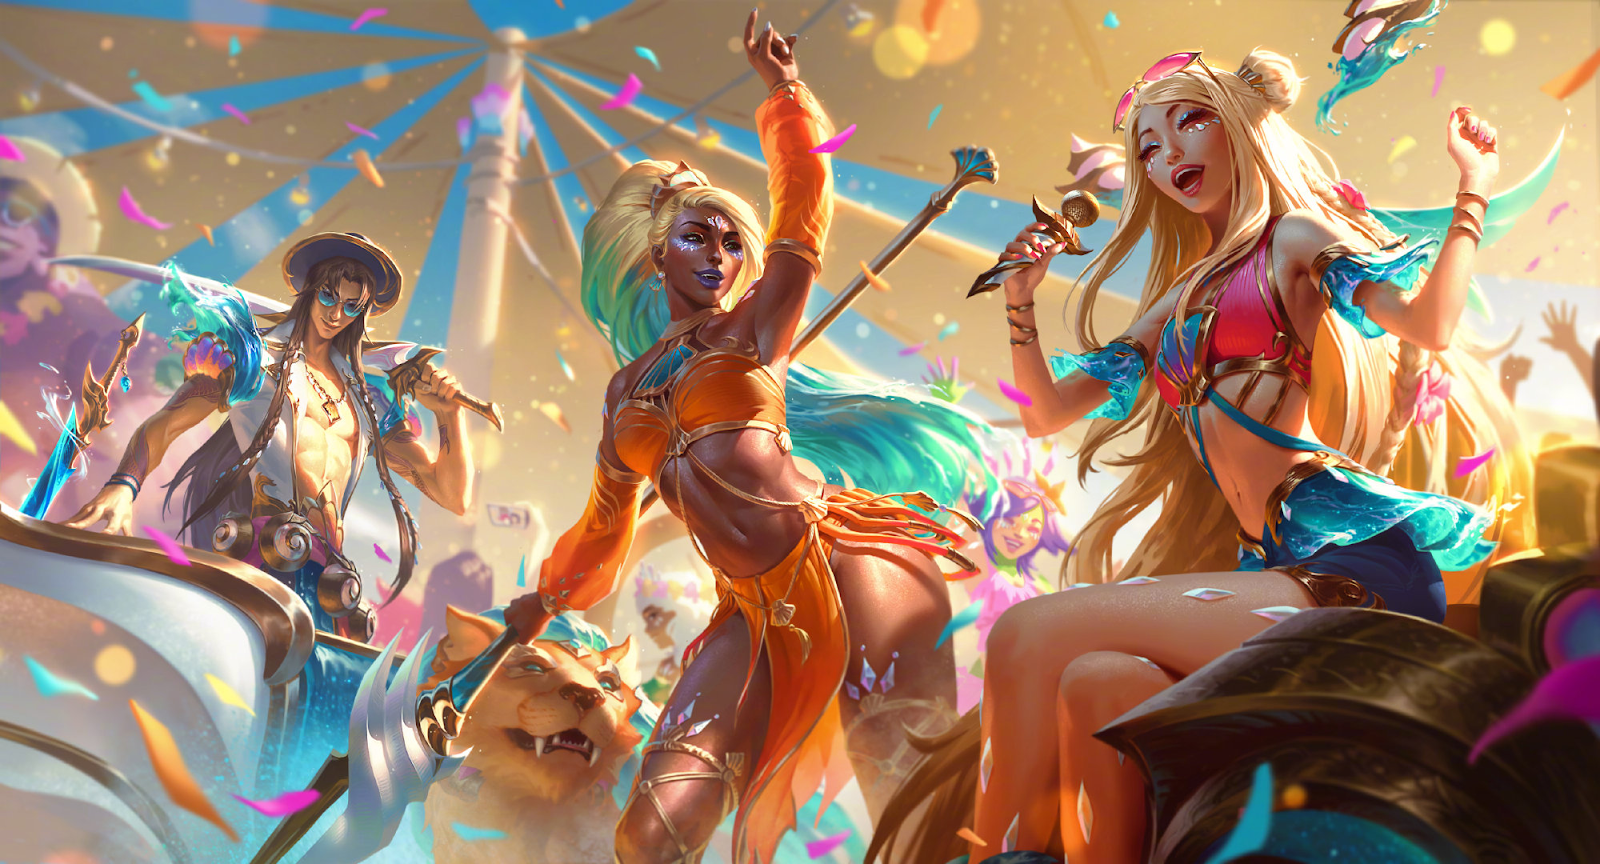 Left to right: Ocean song Yone, Nidalee and Seraphine are at the front and center of this splash art.